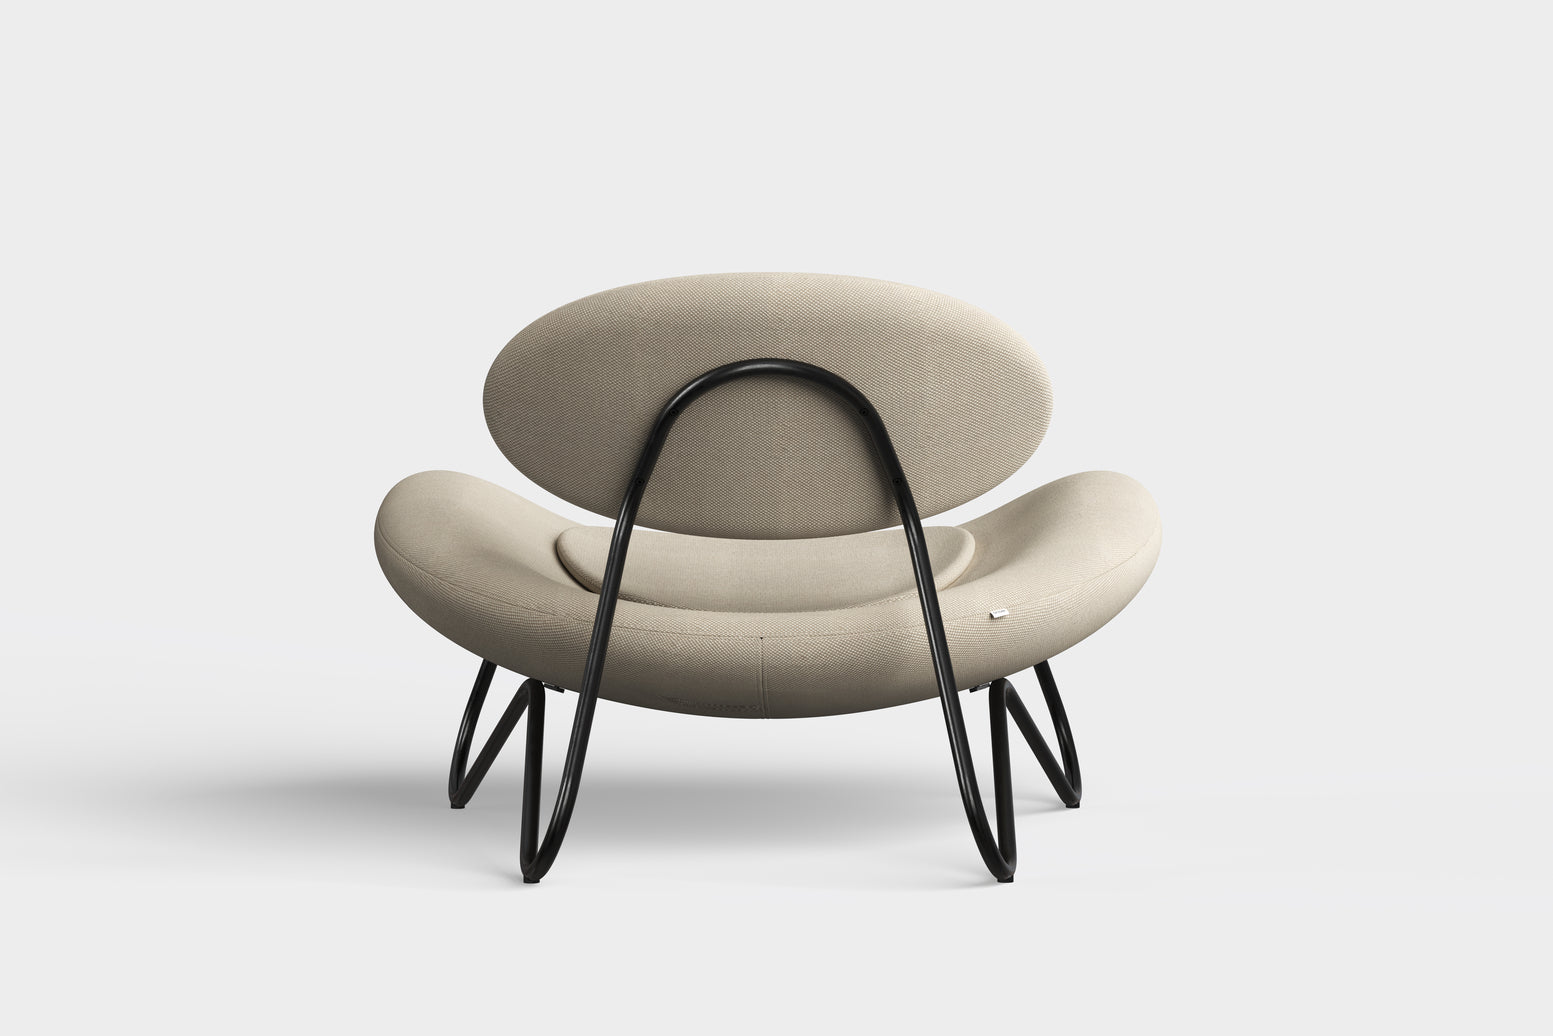 meadow lounge chair off white & grey & black by woud at adorn.house  Edit alt text